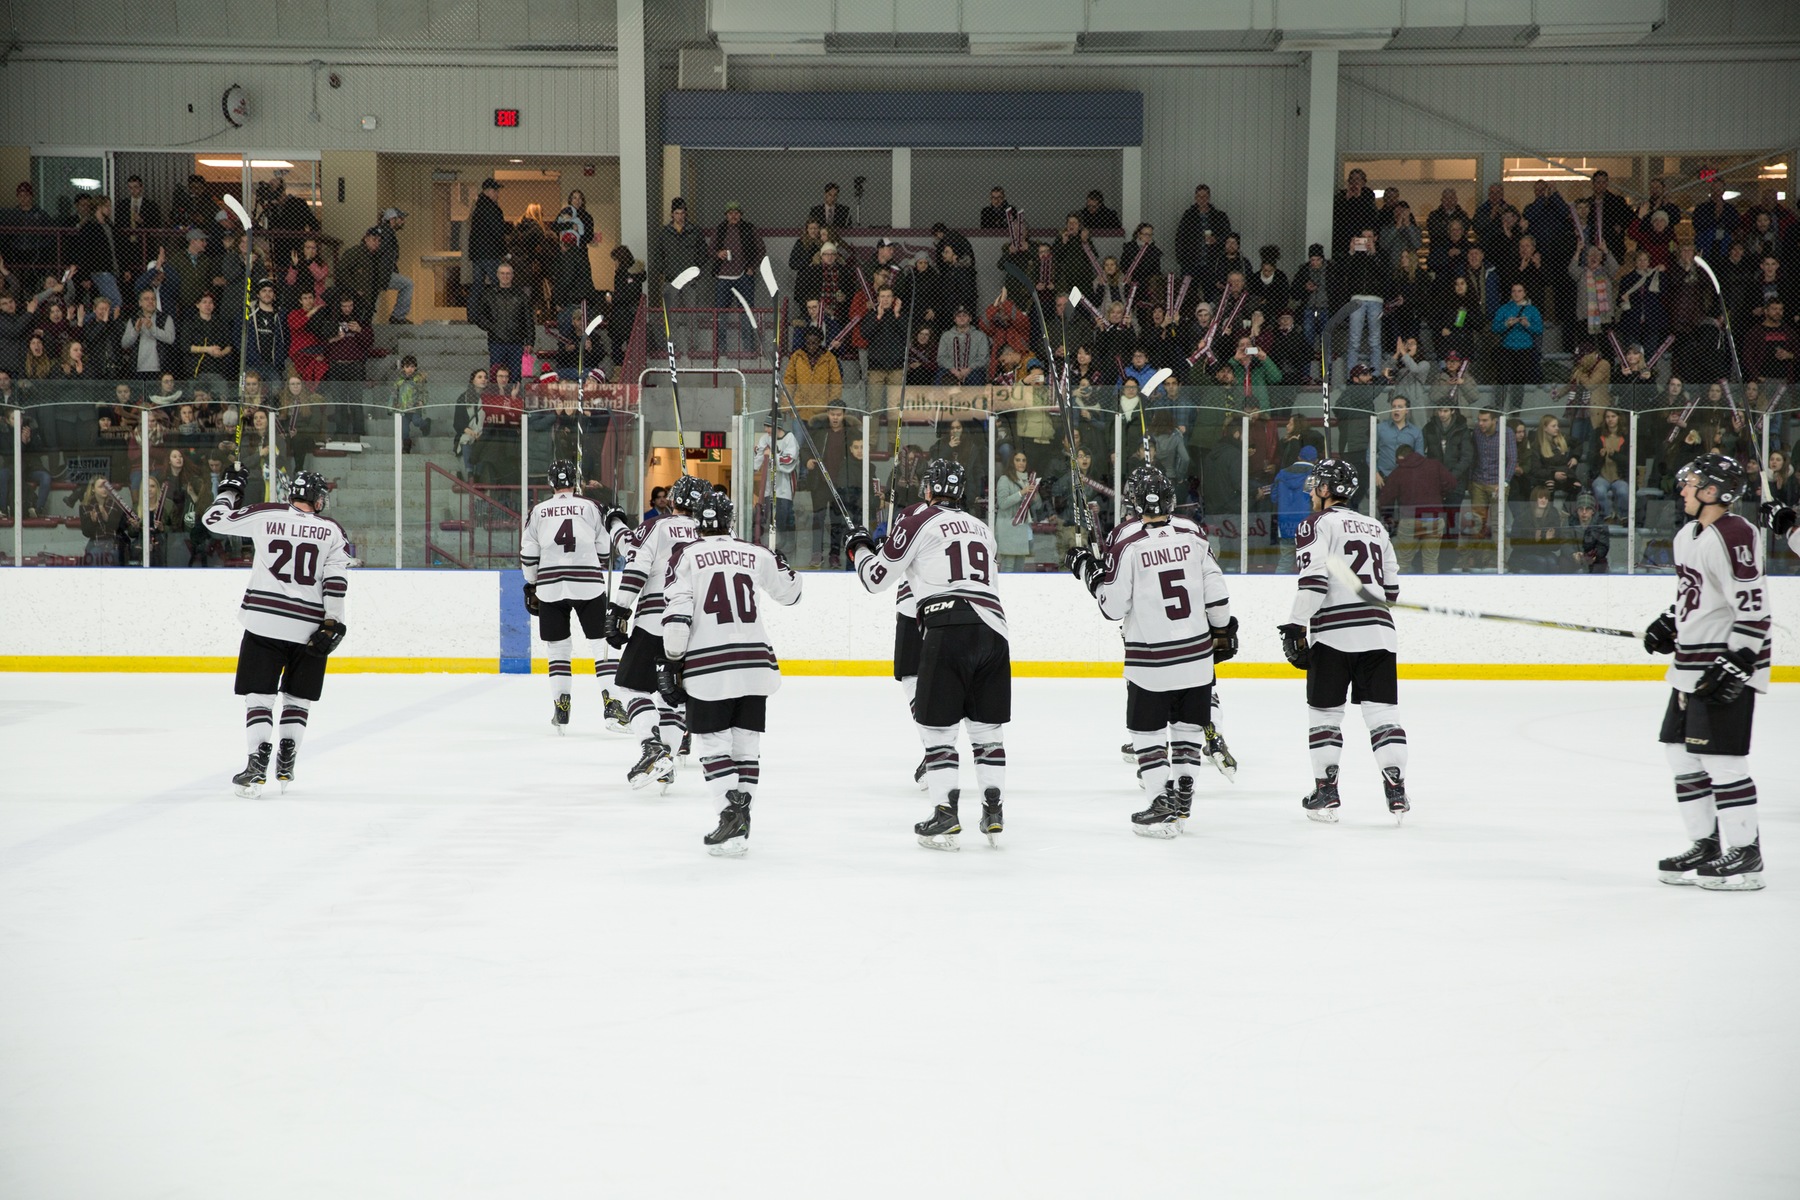 Gee-Gees hockey players salute fans after win.